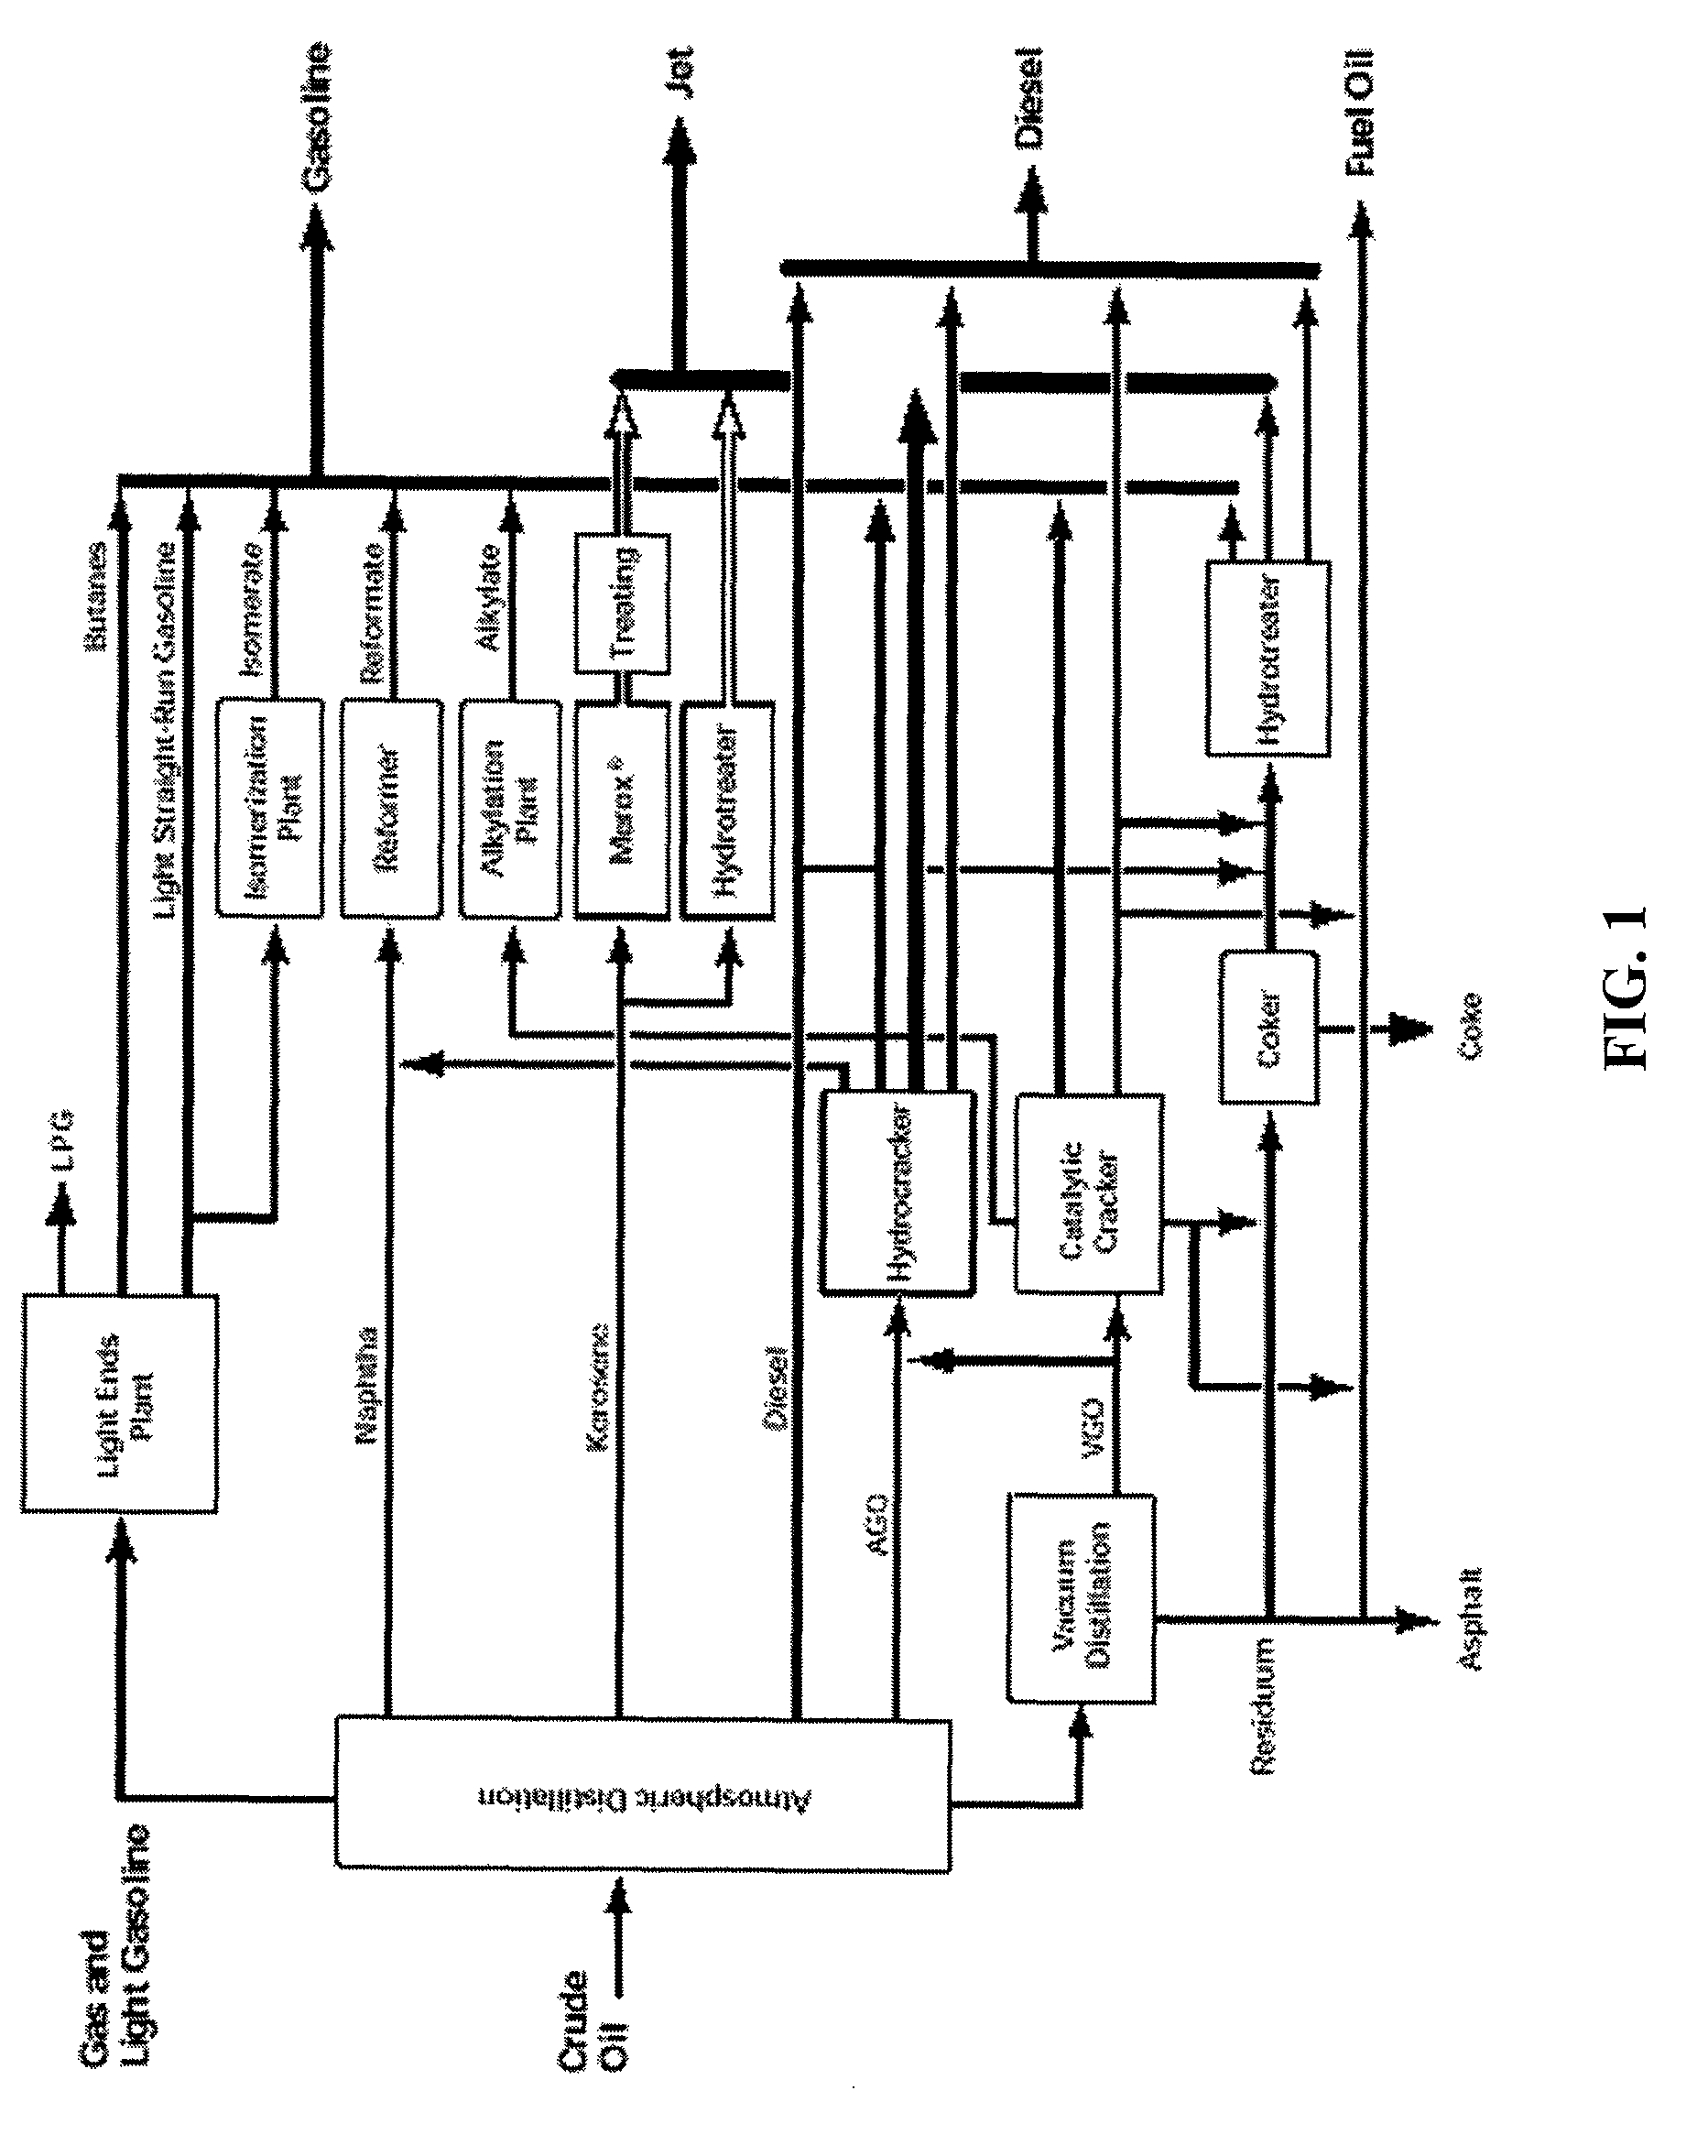 Process for conversion of biomass to fuel